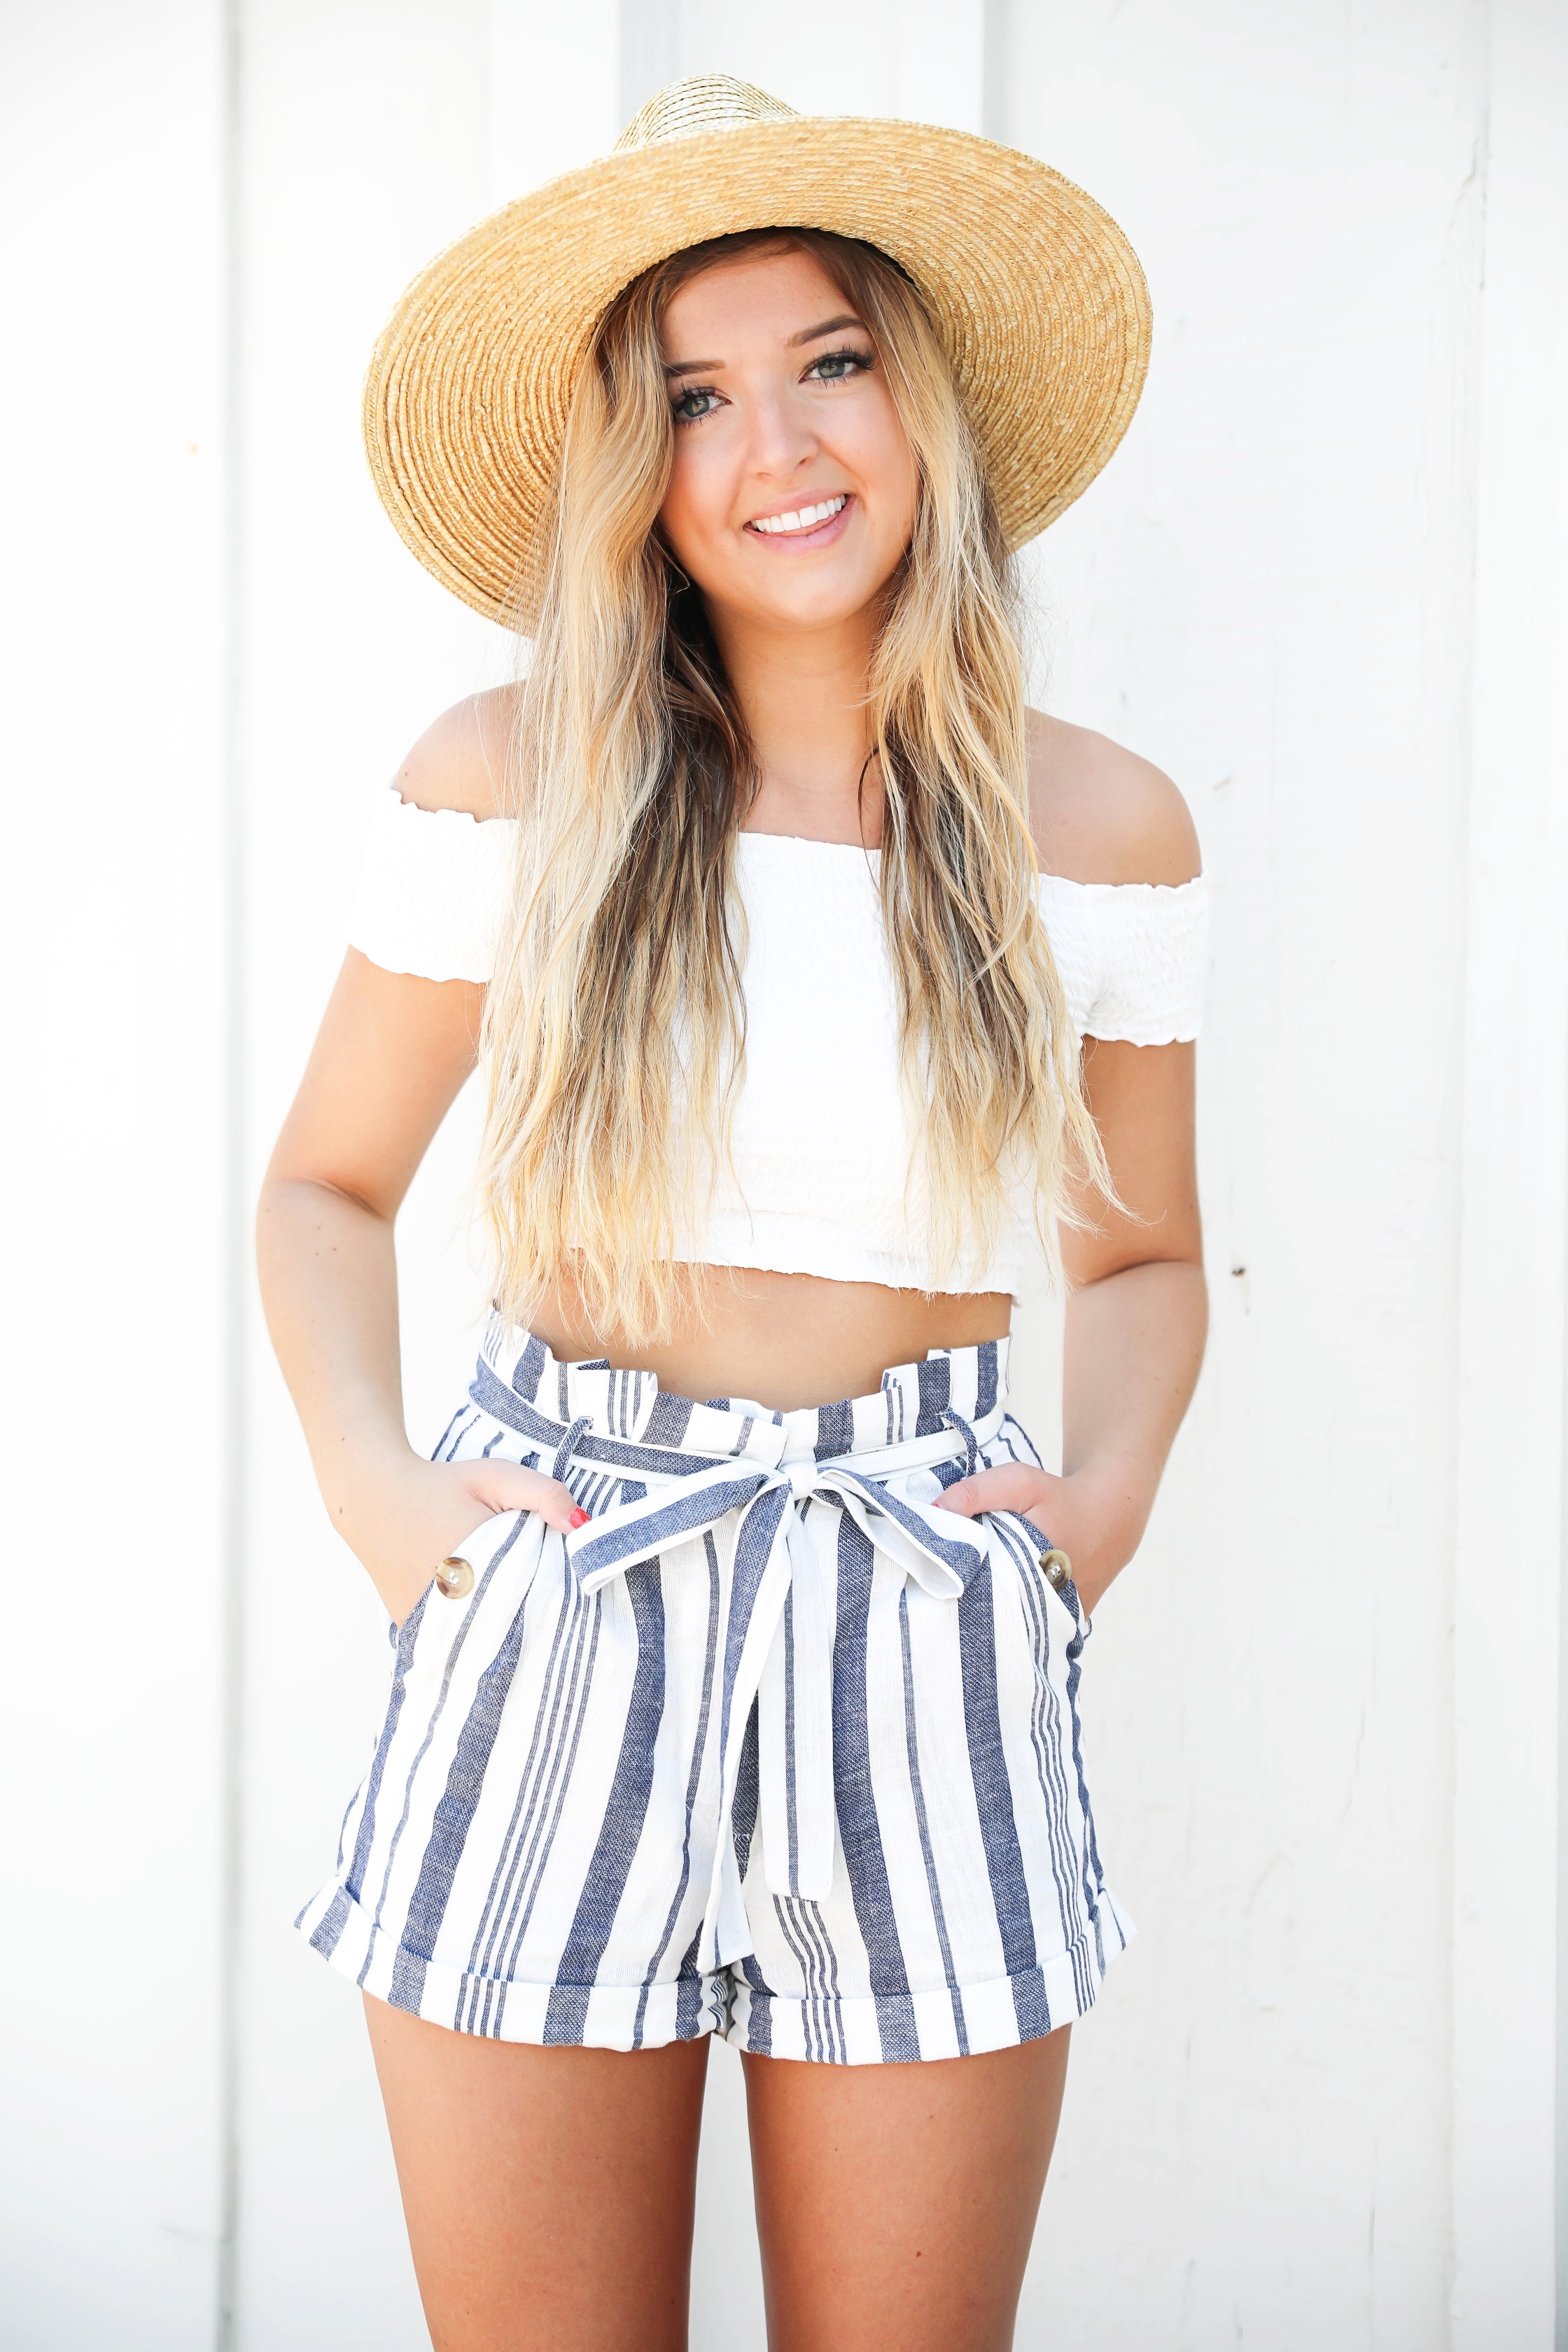 White off the shoulder crop top from Showpo paired with my favorite striped blue tied shorts from Nordstrom! I paired this look with a wide brim straw hat and my favorite Marc Fisher Espadrille wedges! This cute summer outfit is going to be on repeat! Details on fashion blog daily dose of charm by lauren lindmark